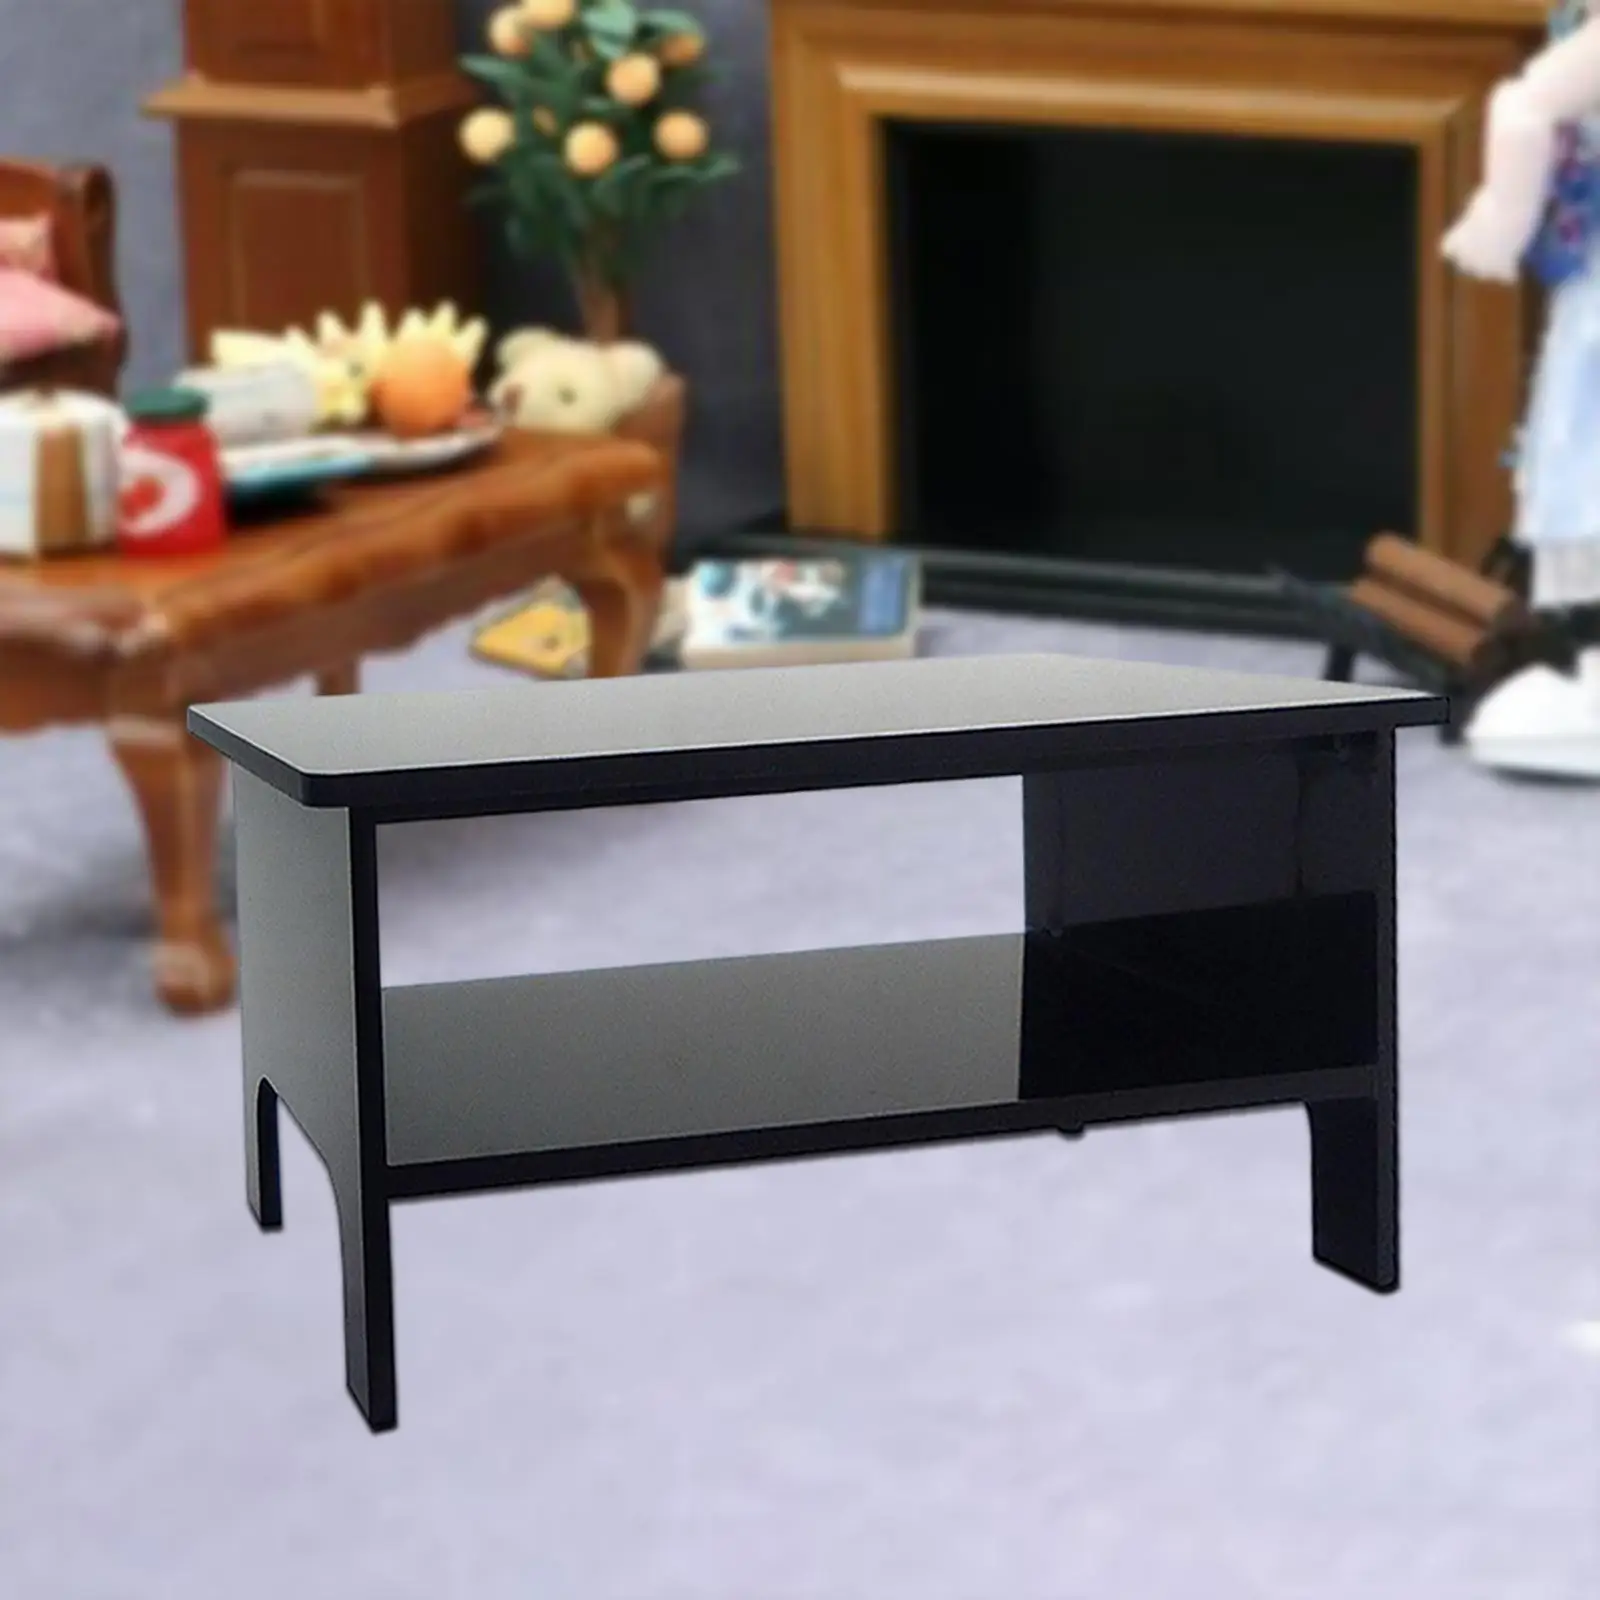 Acrylic Dollhouse Coffee Table Furniture Model for Doll House Decoration